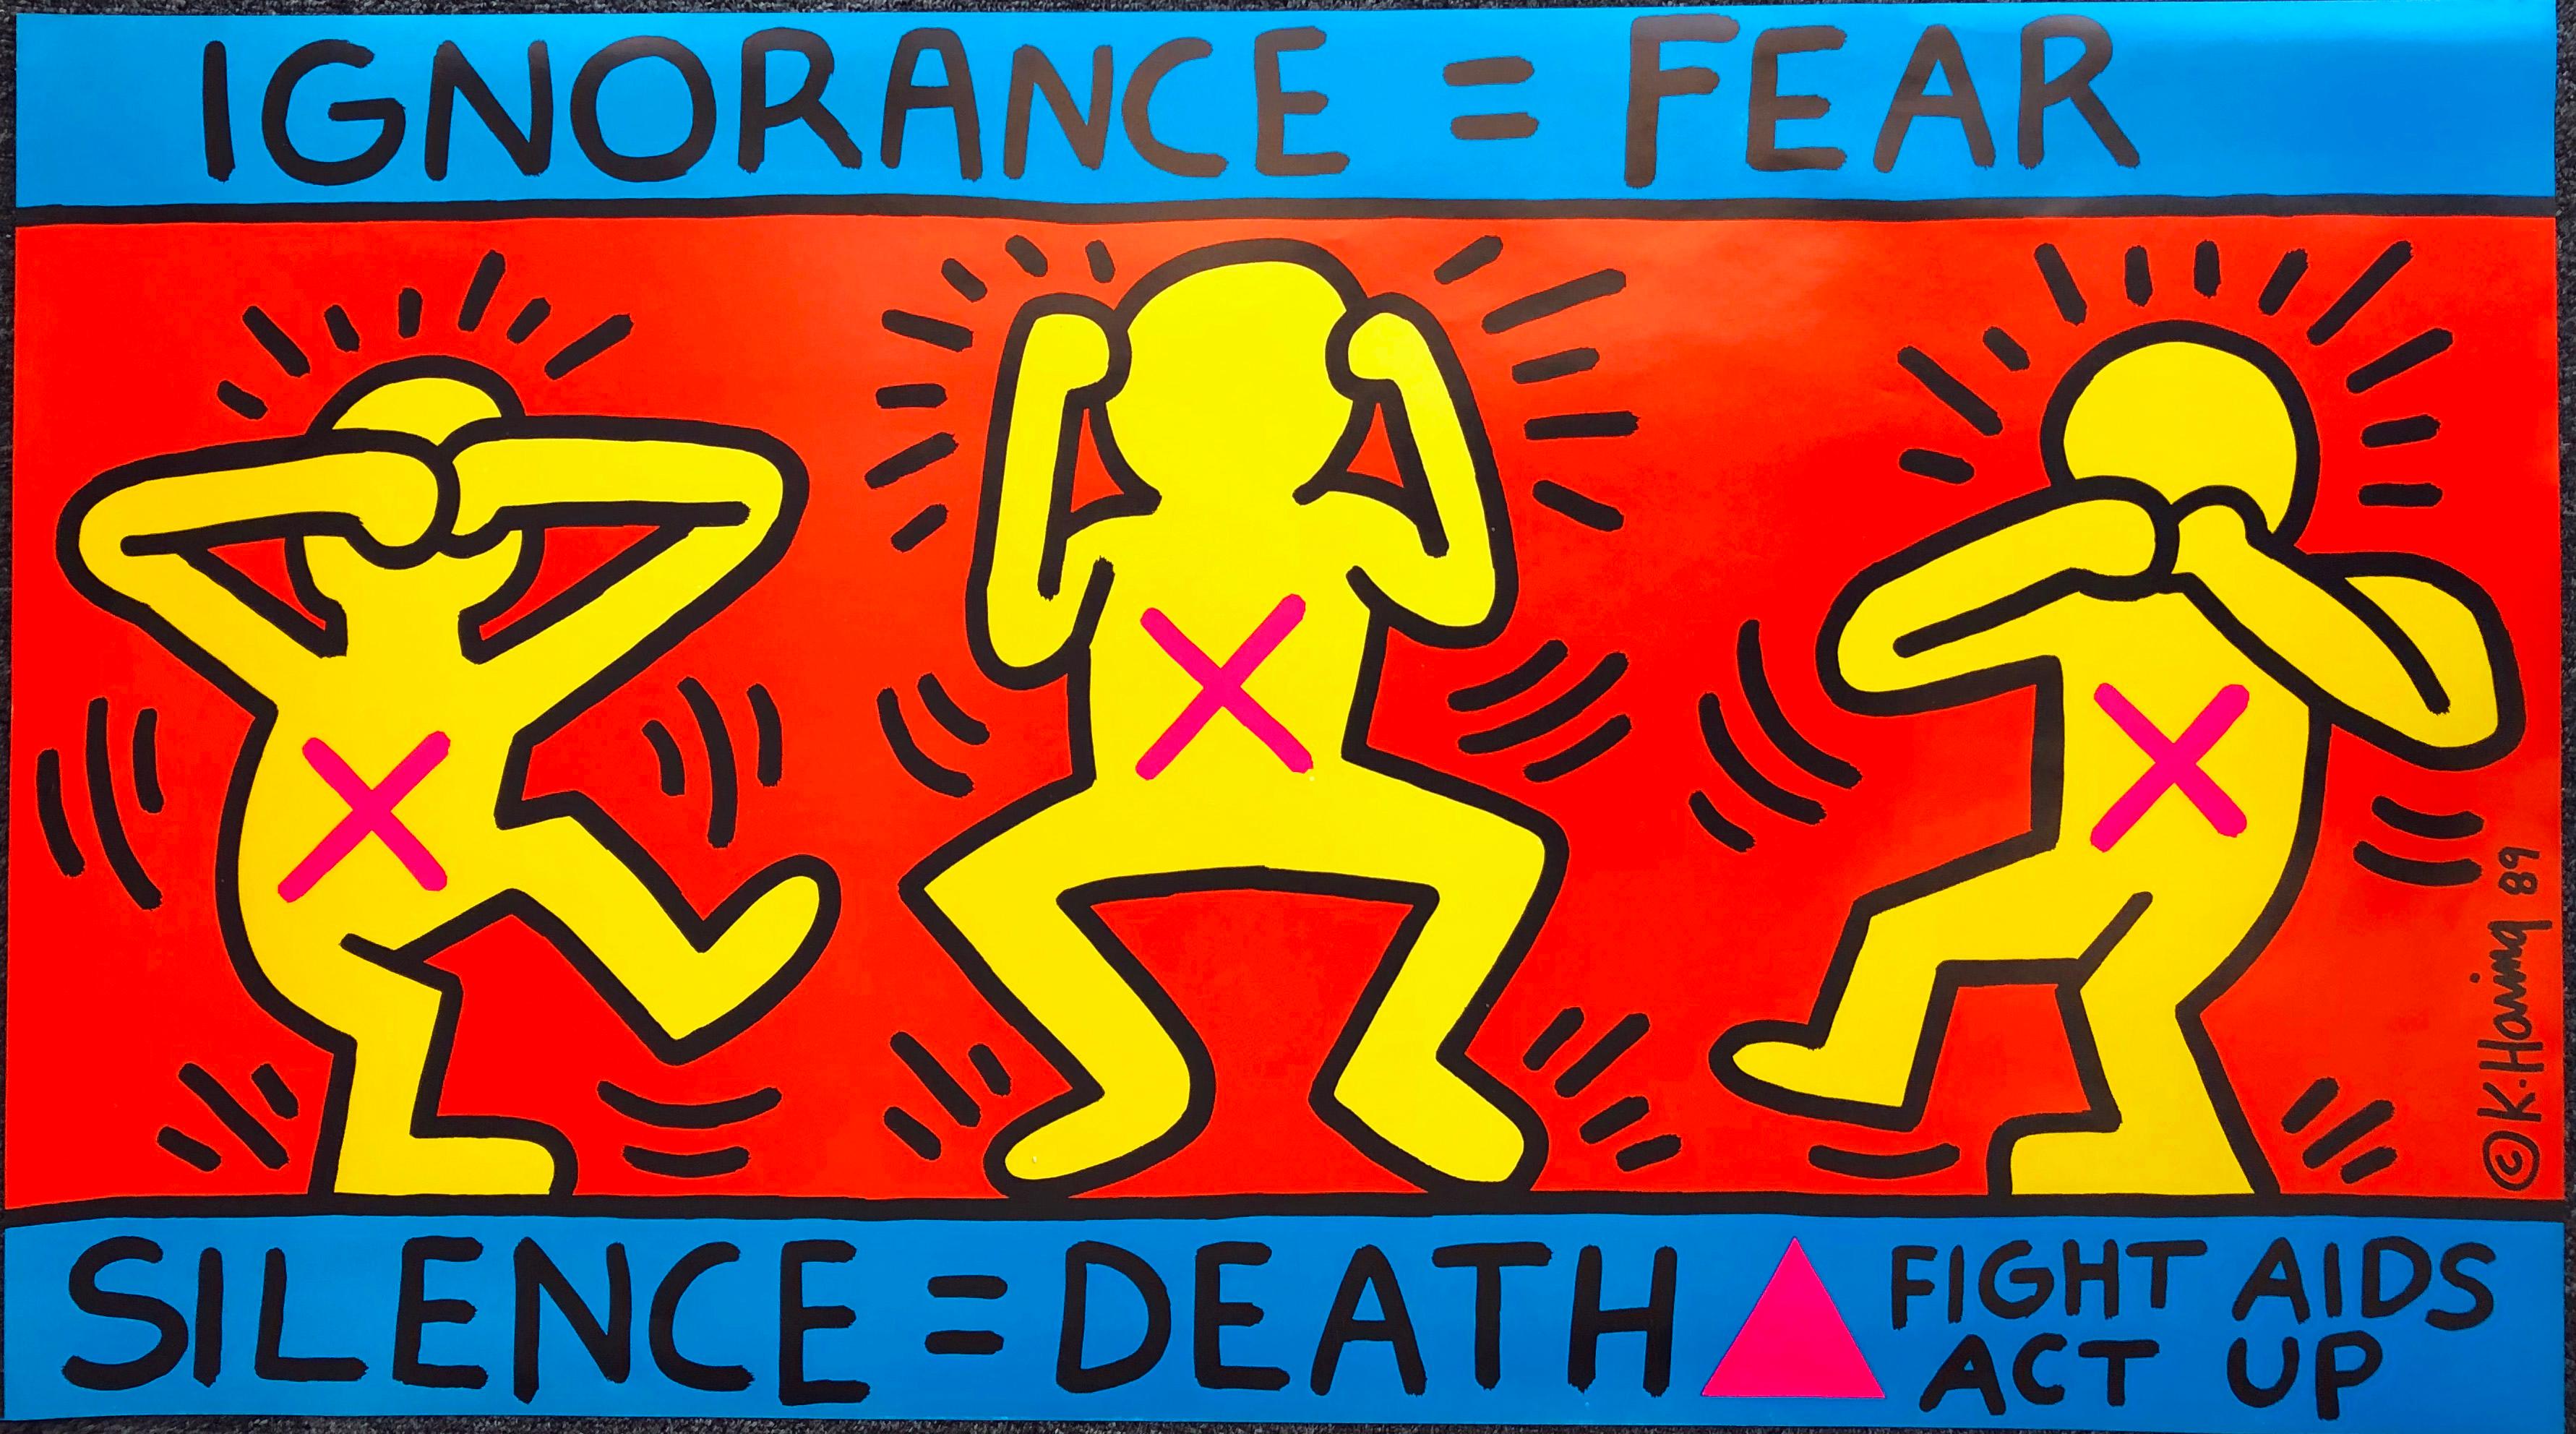 Original 1989 Keith Haring, Ignorance = Fear Silence = Death poster 
On behalf of the New York-based AIDS activist group AIDS Coalition to Unleash Power (ACT UP), Keith Haring designed and executed this poster in 1989 after the artist had been